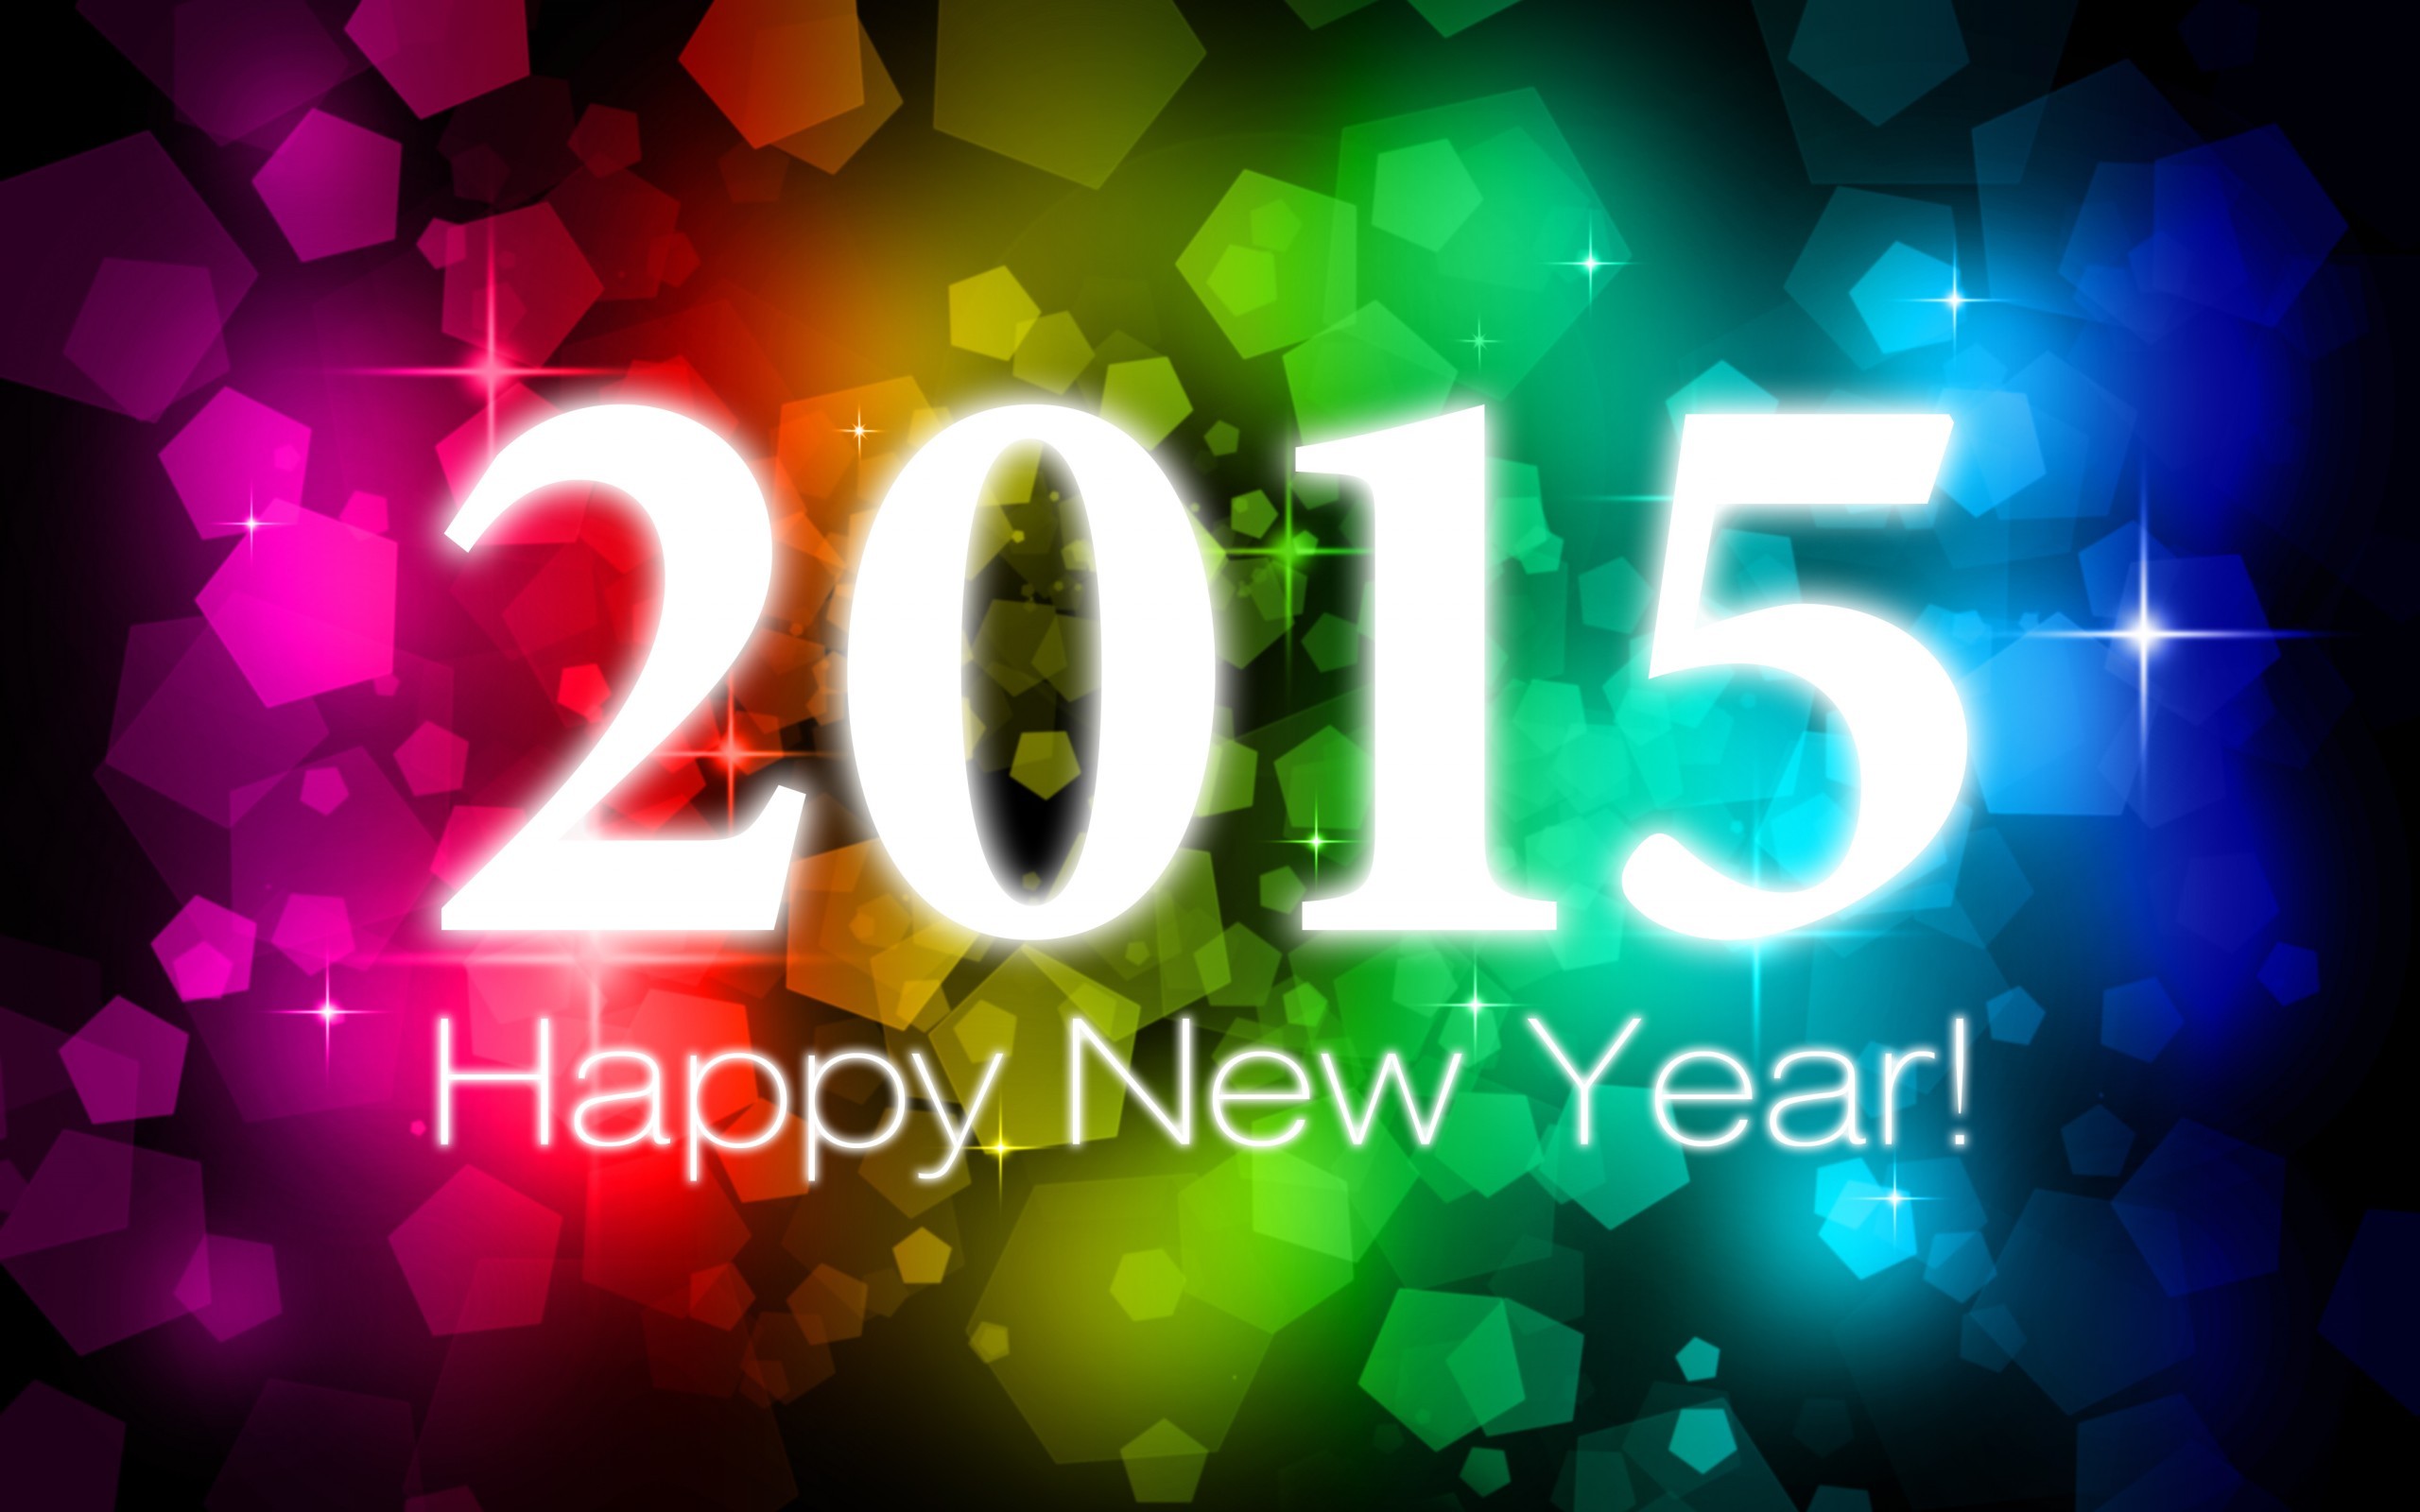 General 2560x1600 New Year snow pentagons colorful 2015 (Year) holiday typography